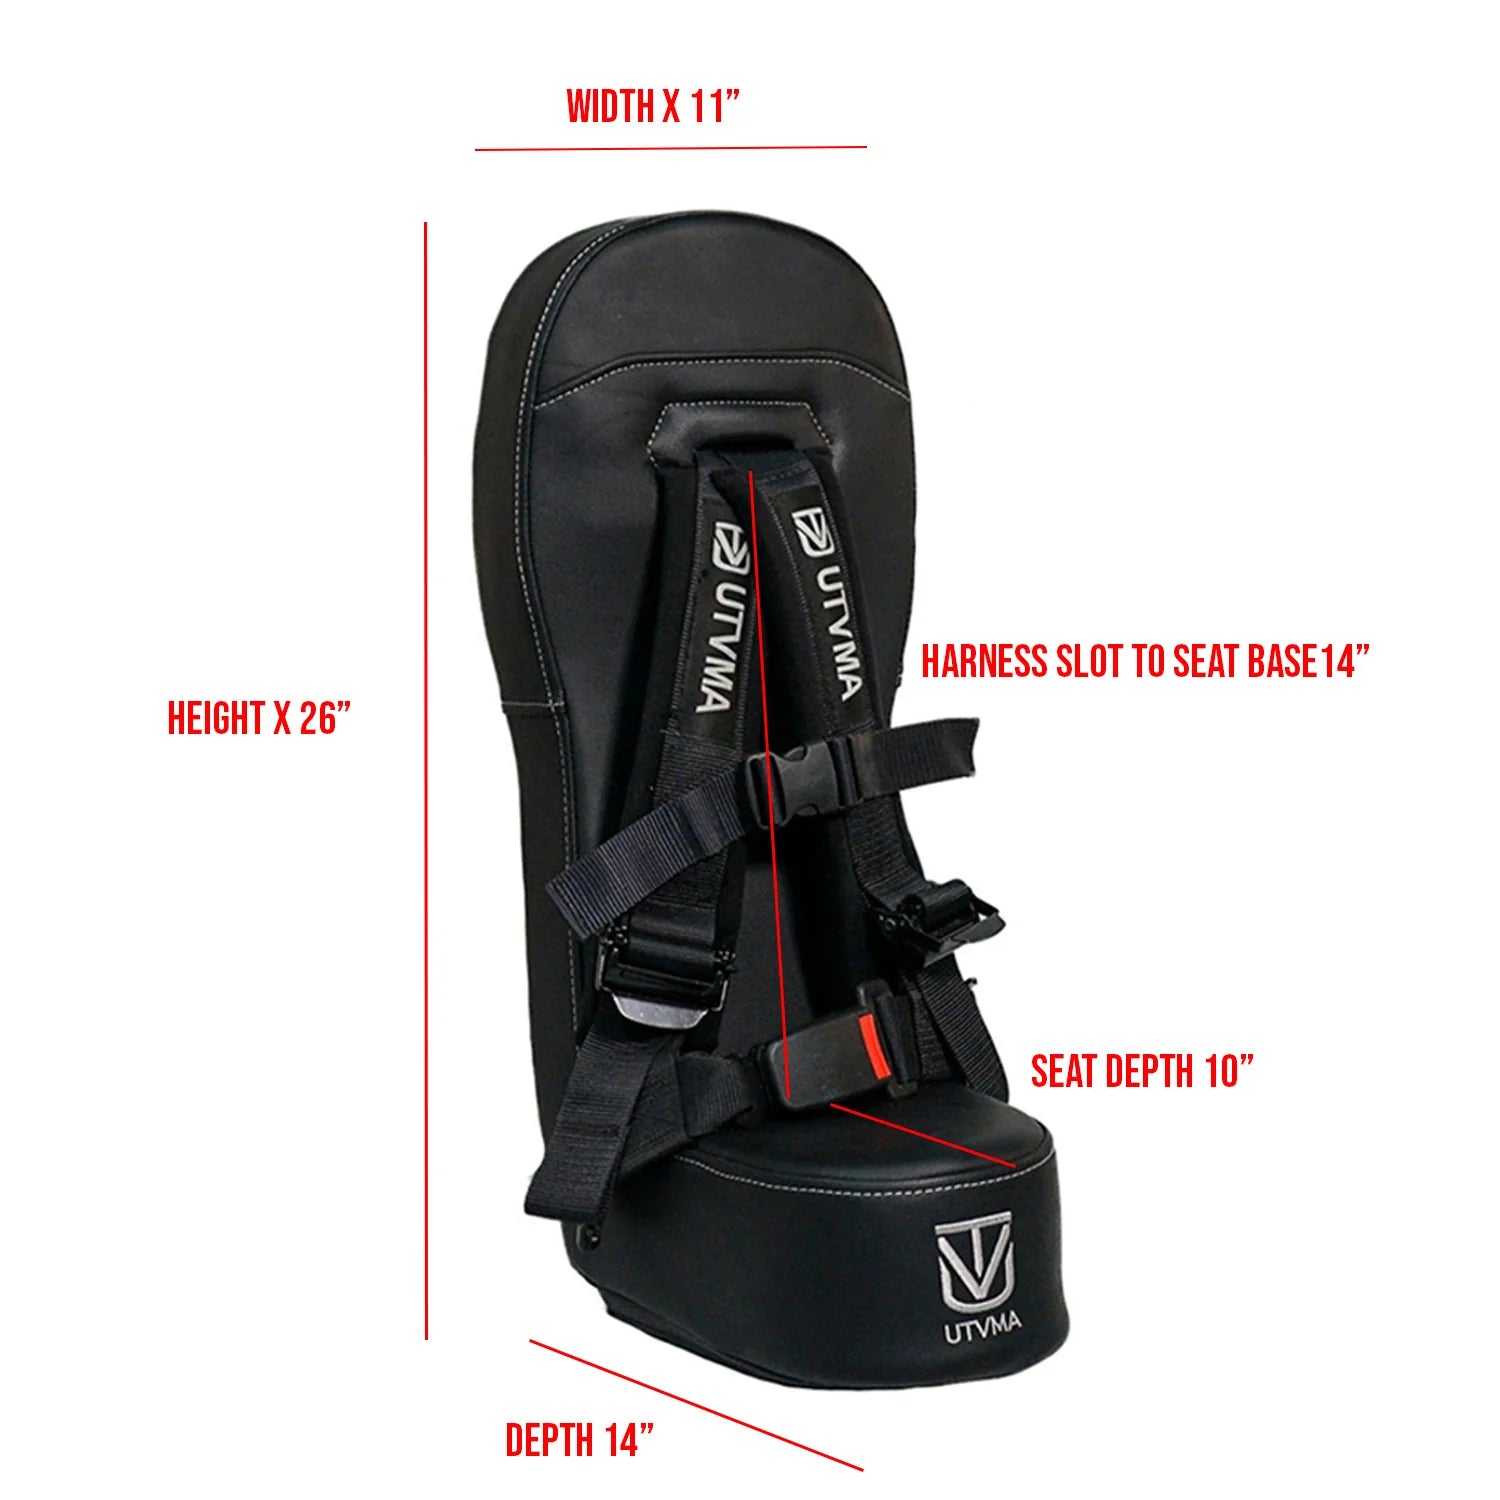 RZR 4 800 Bump Seats Set (Front and Rear)